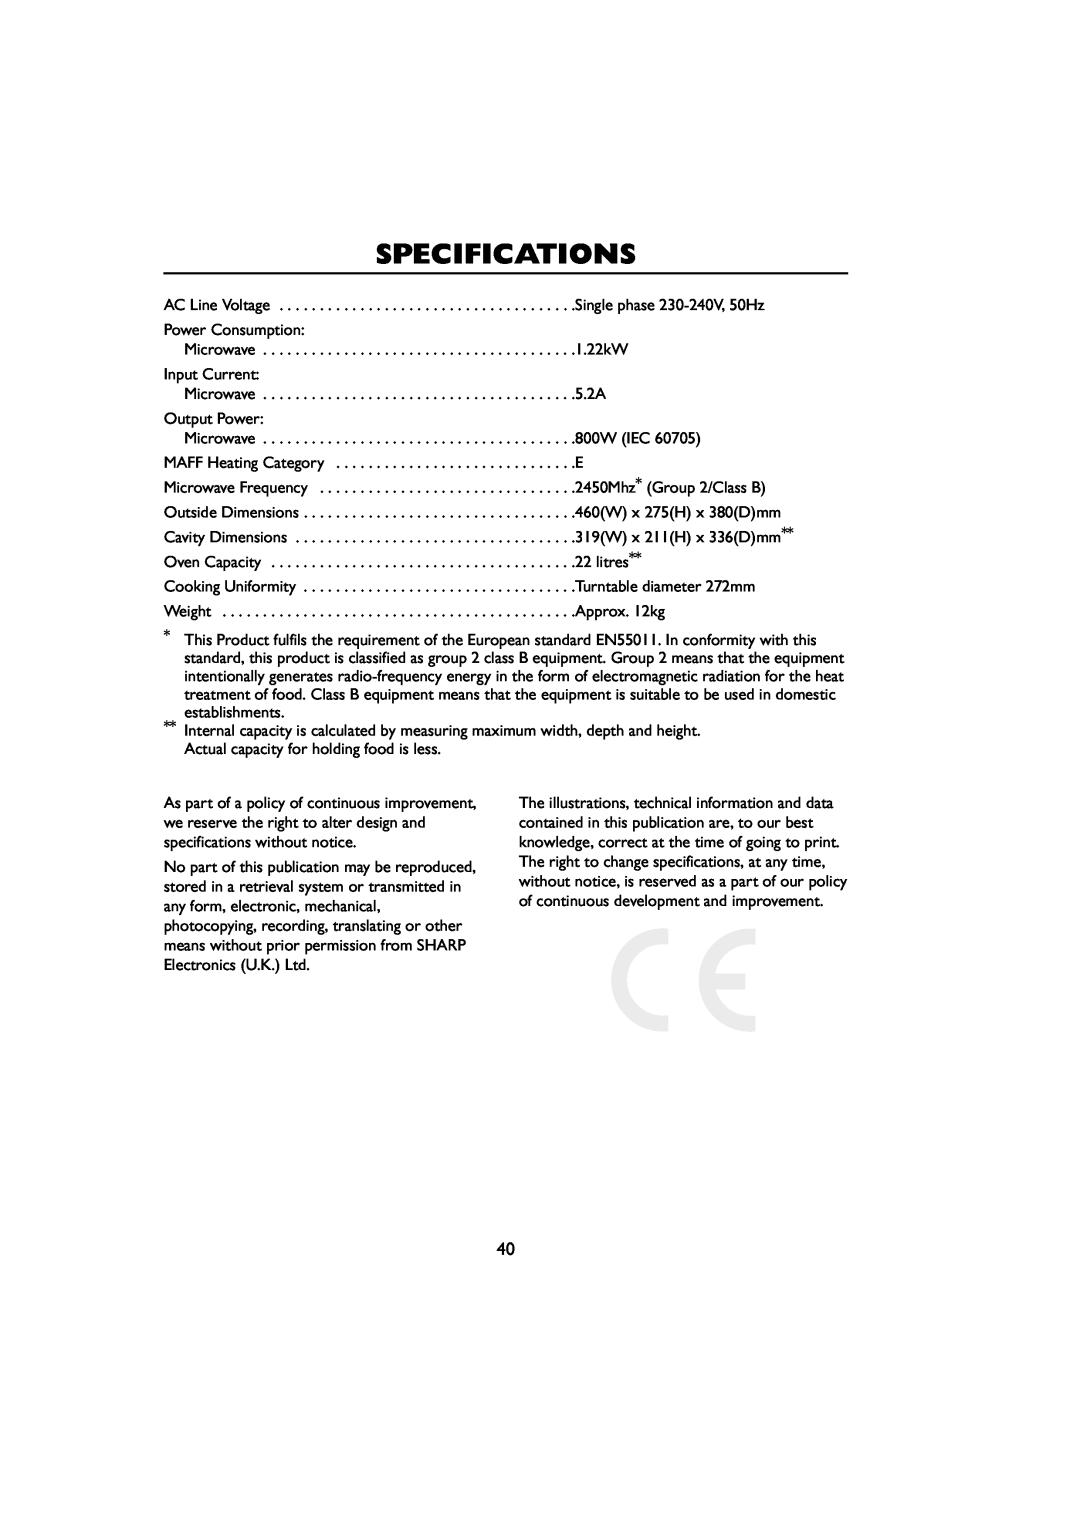 Sharp R-259 operation manual Specifications 